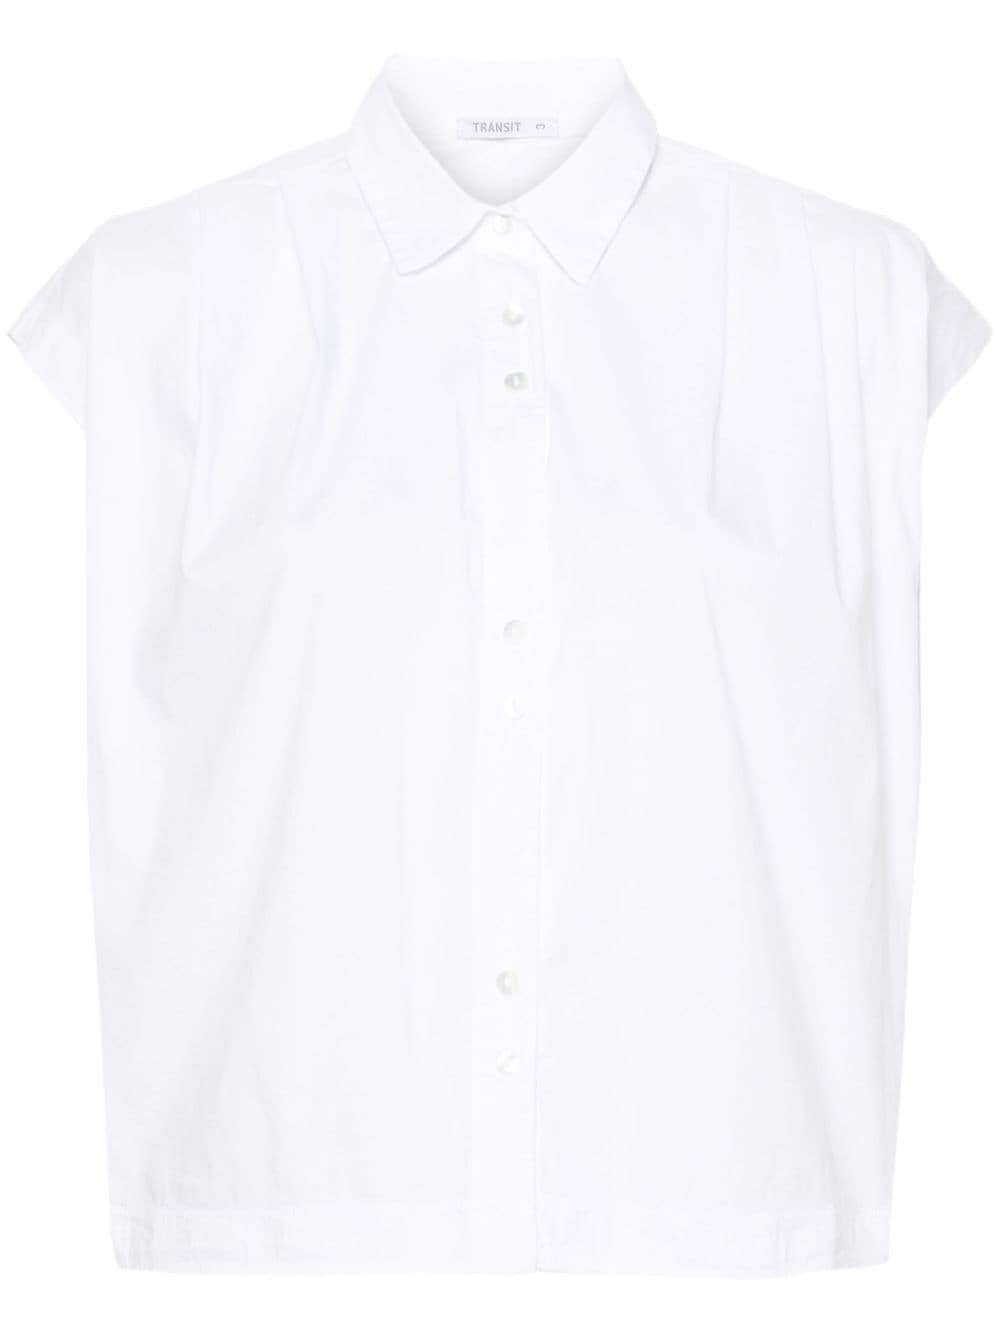 Transit Sleeveless Darted Blouse In White